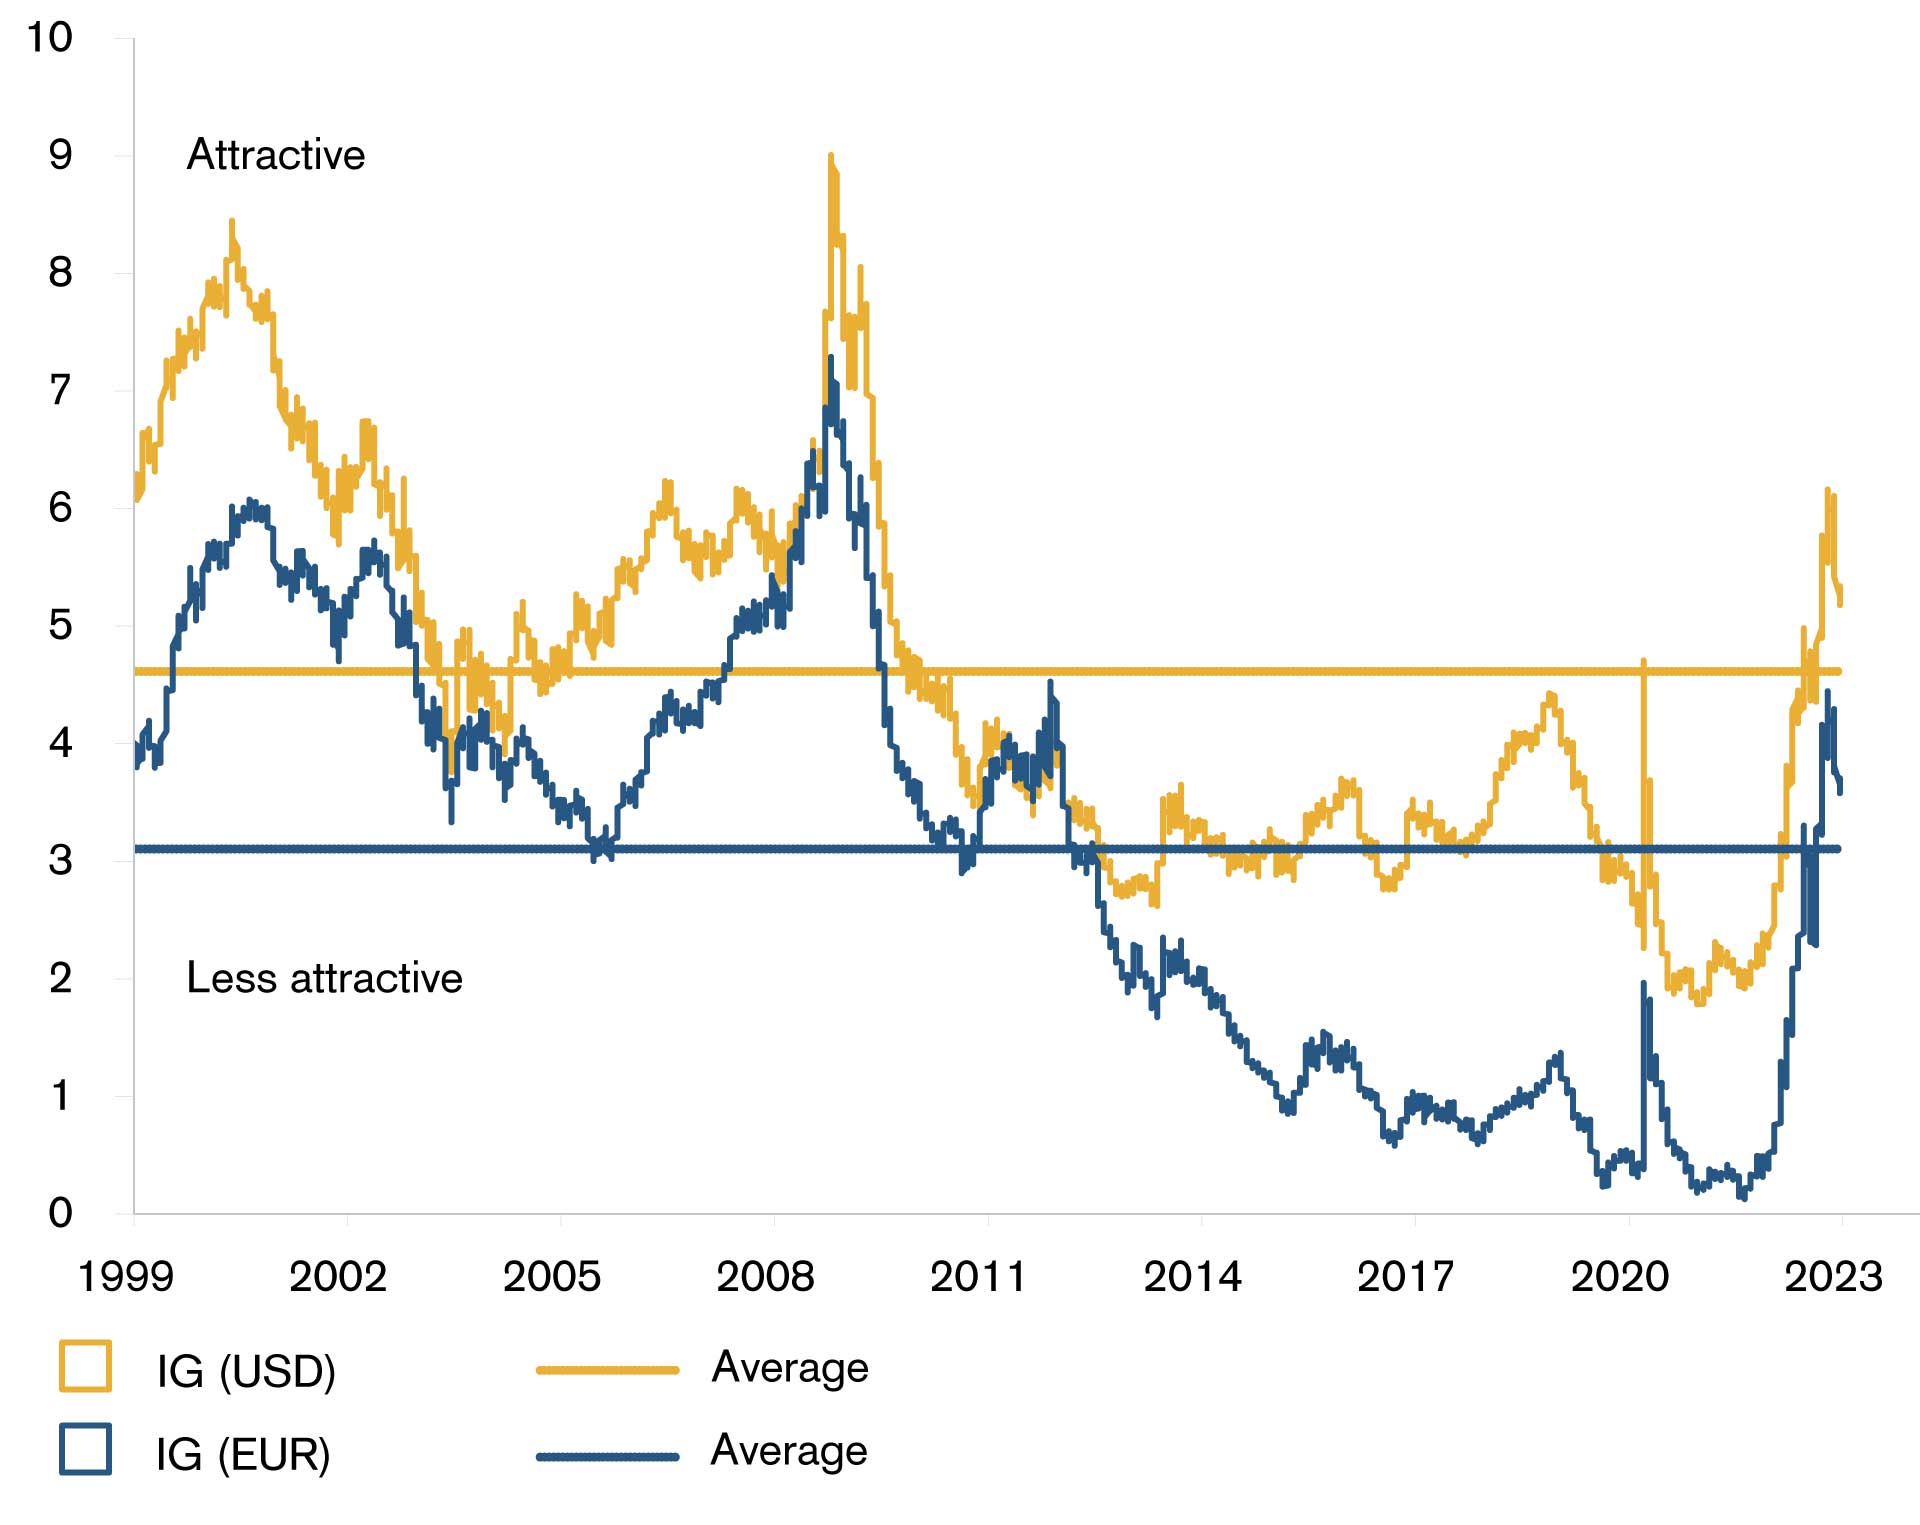 The two charts show average yield percentage levels for investment-grade (IG) and high-yield bonds (HY) in USD and EUR respectively. Current valuations show a yield advantage for IG bonds as they are trading above the long-term average, while HY bonds are trading at or slightly below their average (dashed lines).